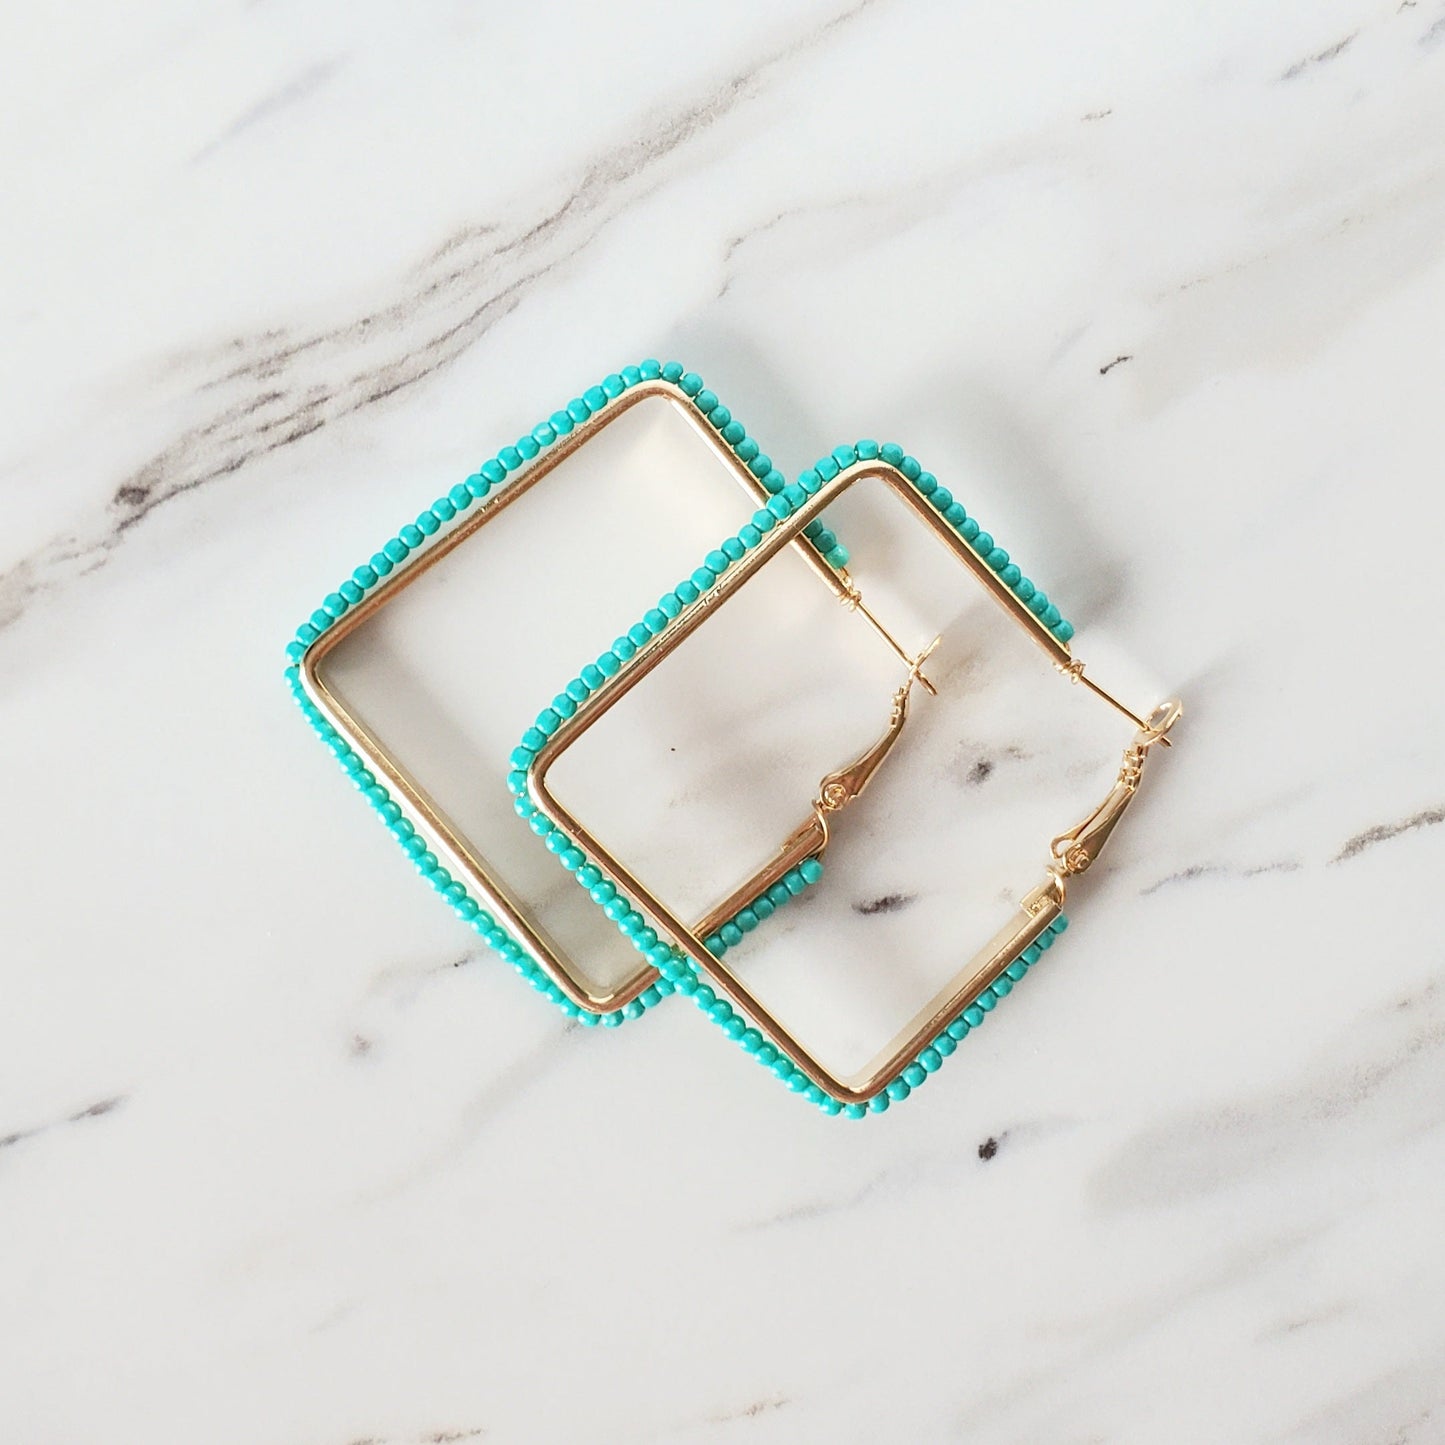 white and gray marbled table with a pair of 2 inch square, hinge back, gold metal earrings with turquoise seed beads wrapped around the metal in a straight line. the earrings are overlapping